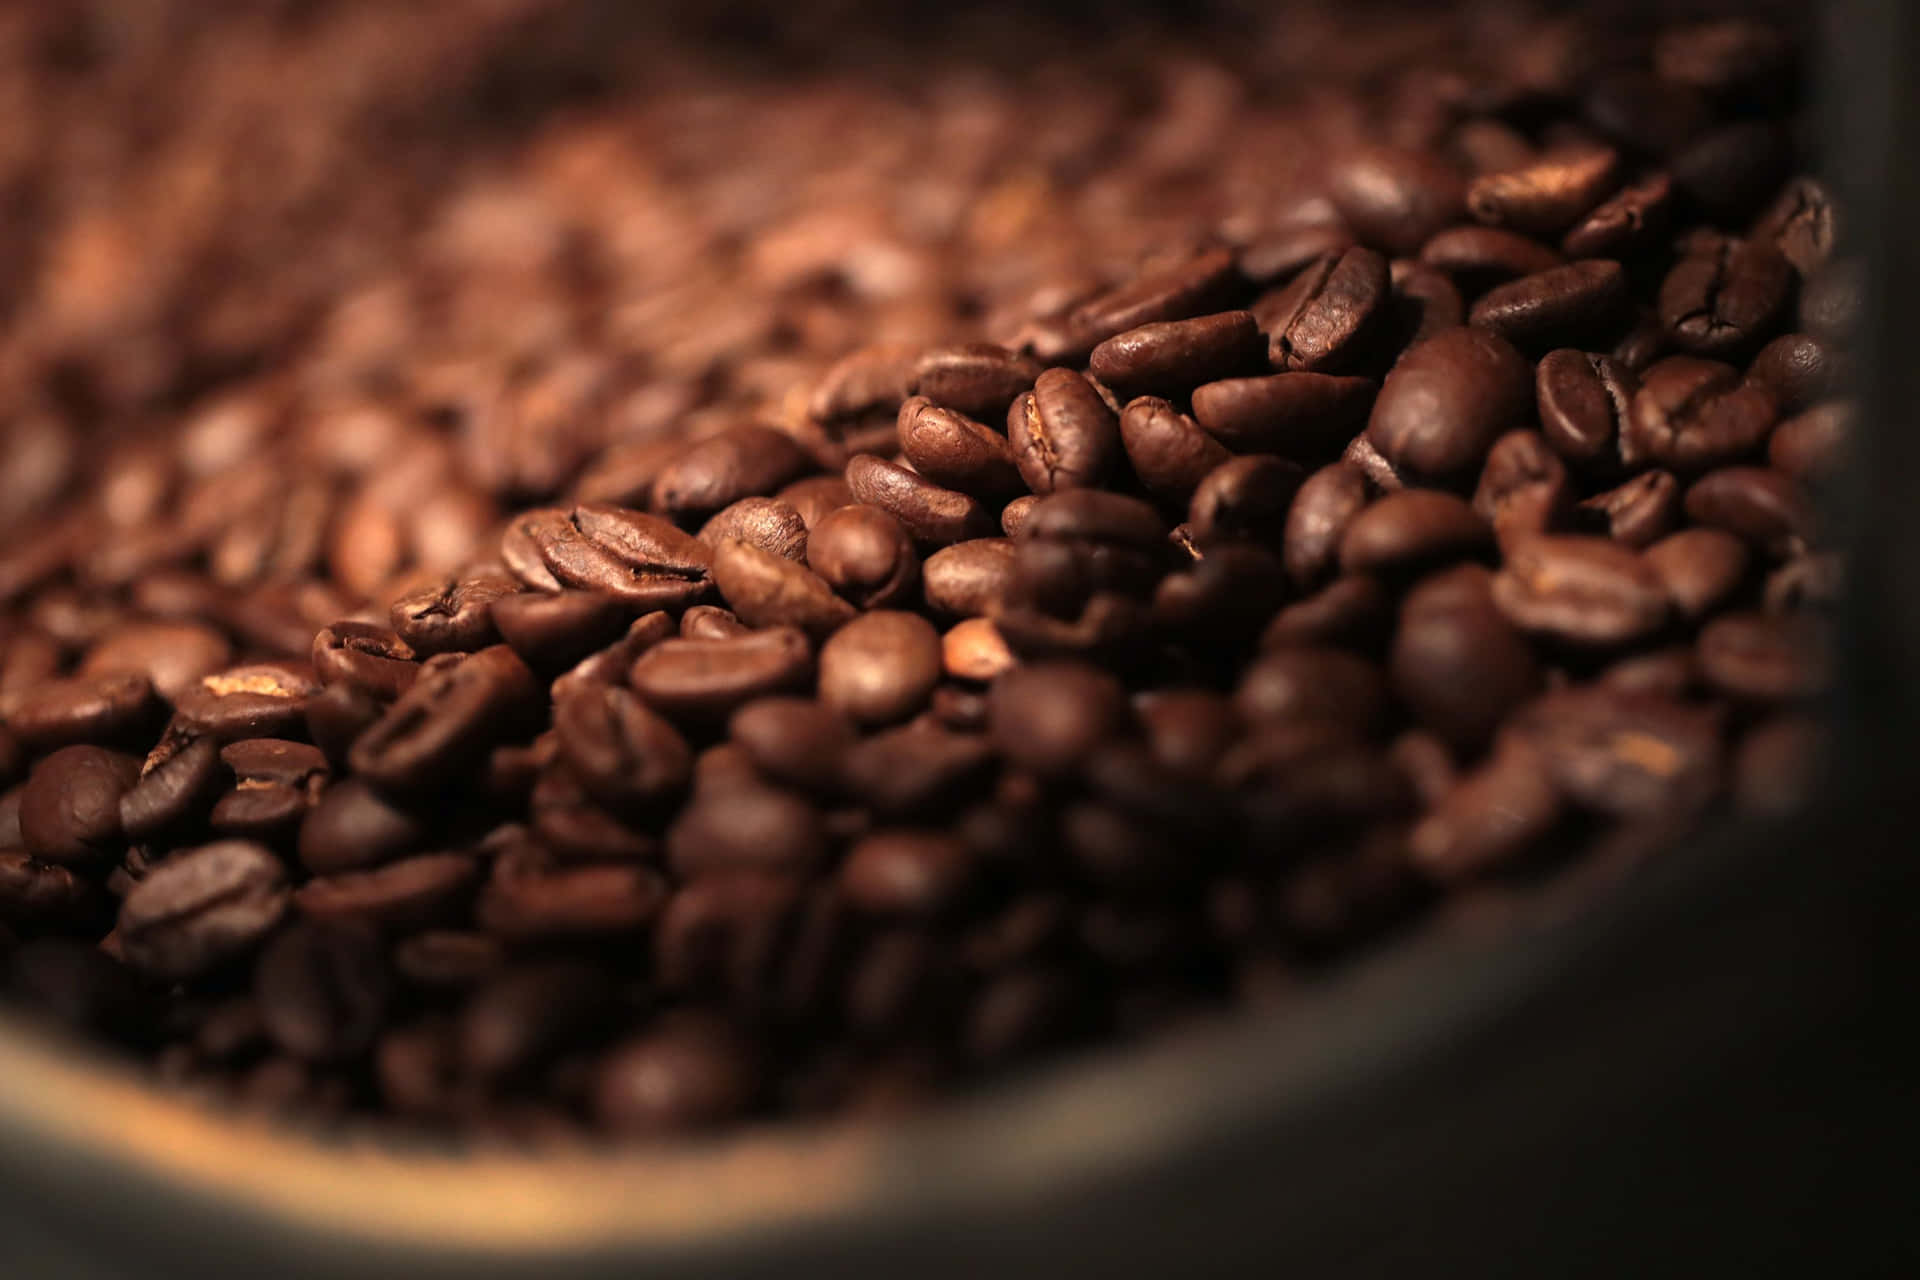 A Close Up Of Coffee Beans